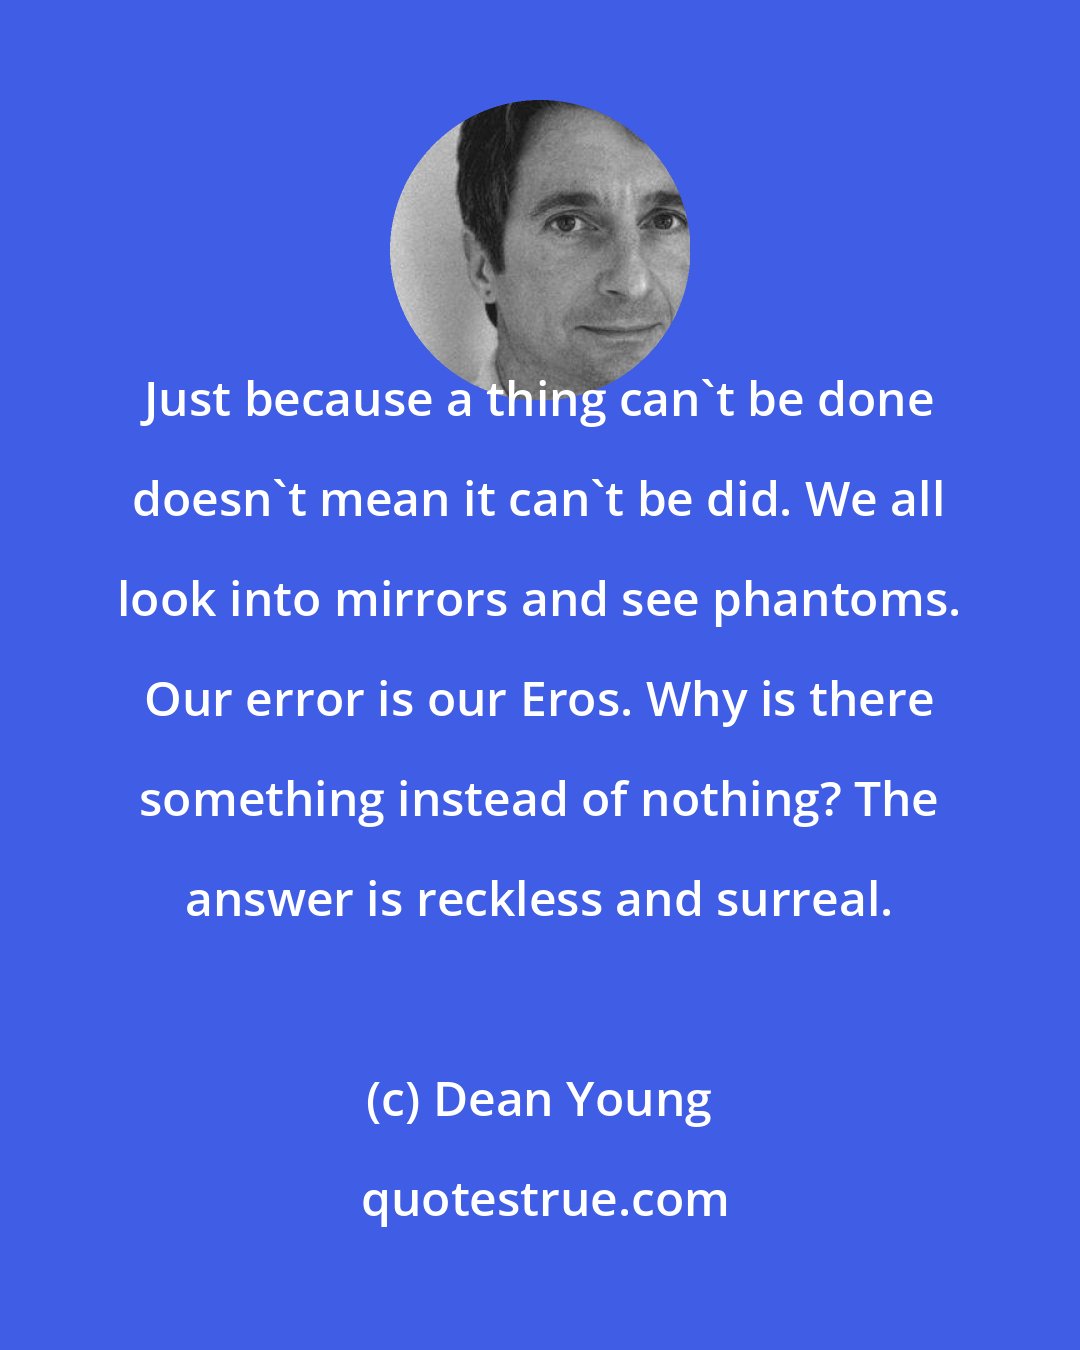 Dean Young: Just because a thing can't be done doesn't mean it can't be did. We all look into mirrors and see phantoms. Our error is our Eros. Why is there something instead of nothing? The answer is reckless and surreal.